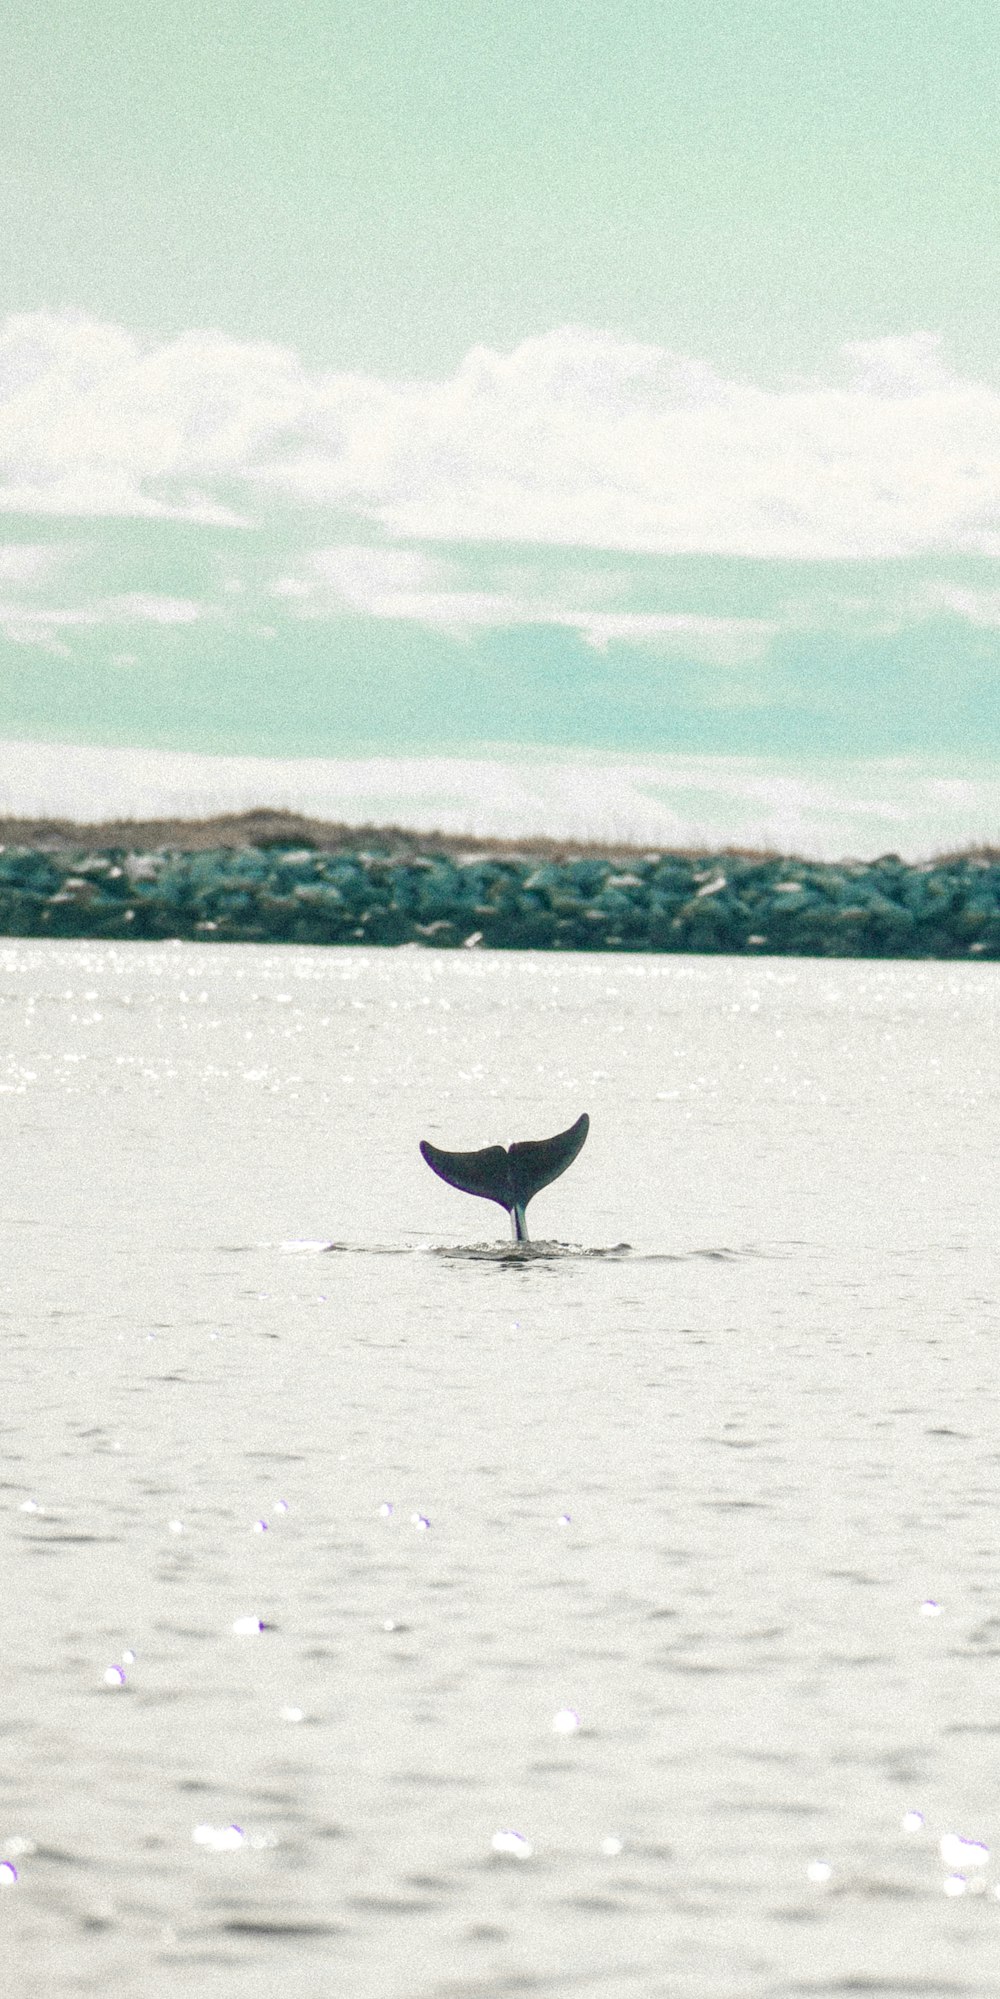 purple whale on body of water during daytime